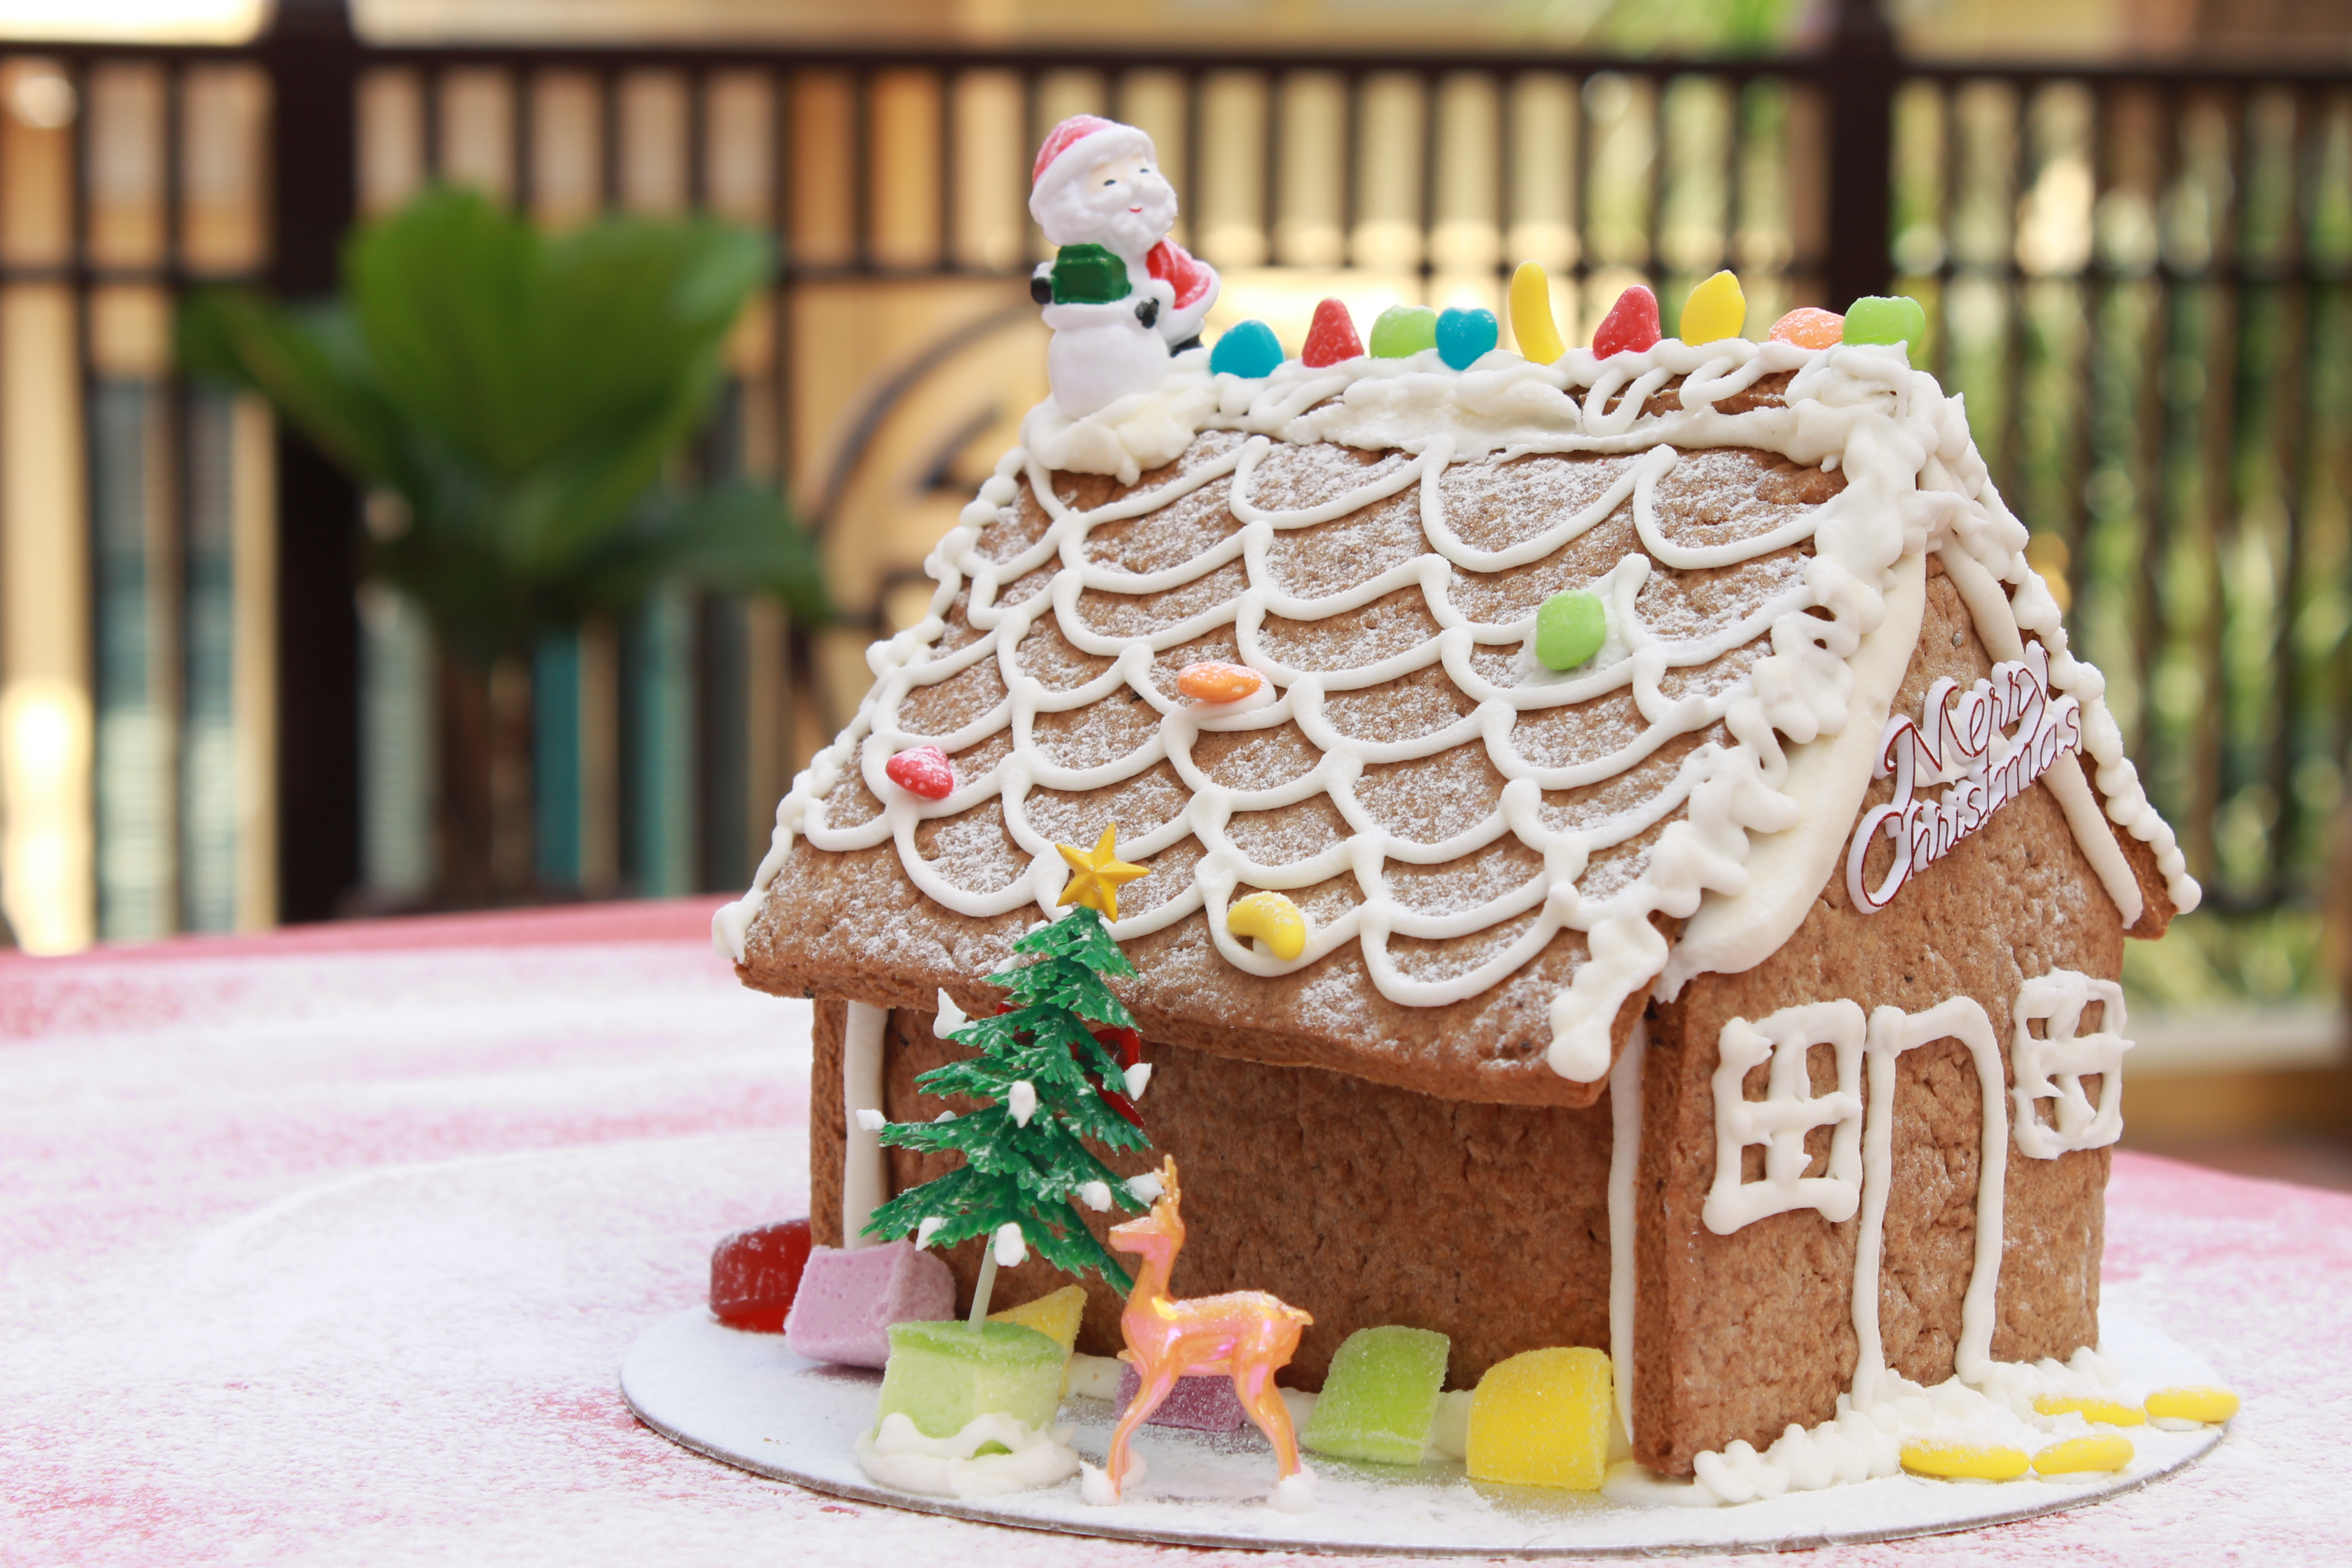 10+ decorations for gingerbread house to make your holiday baking extra festive